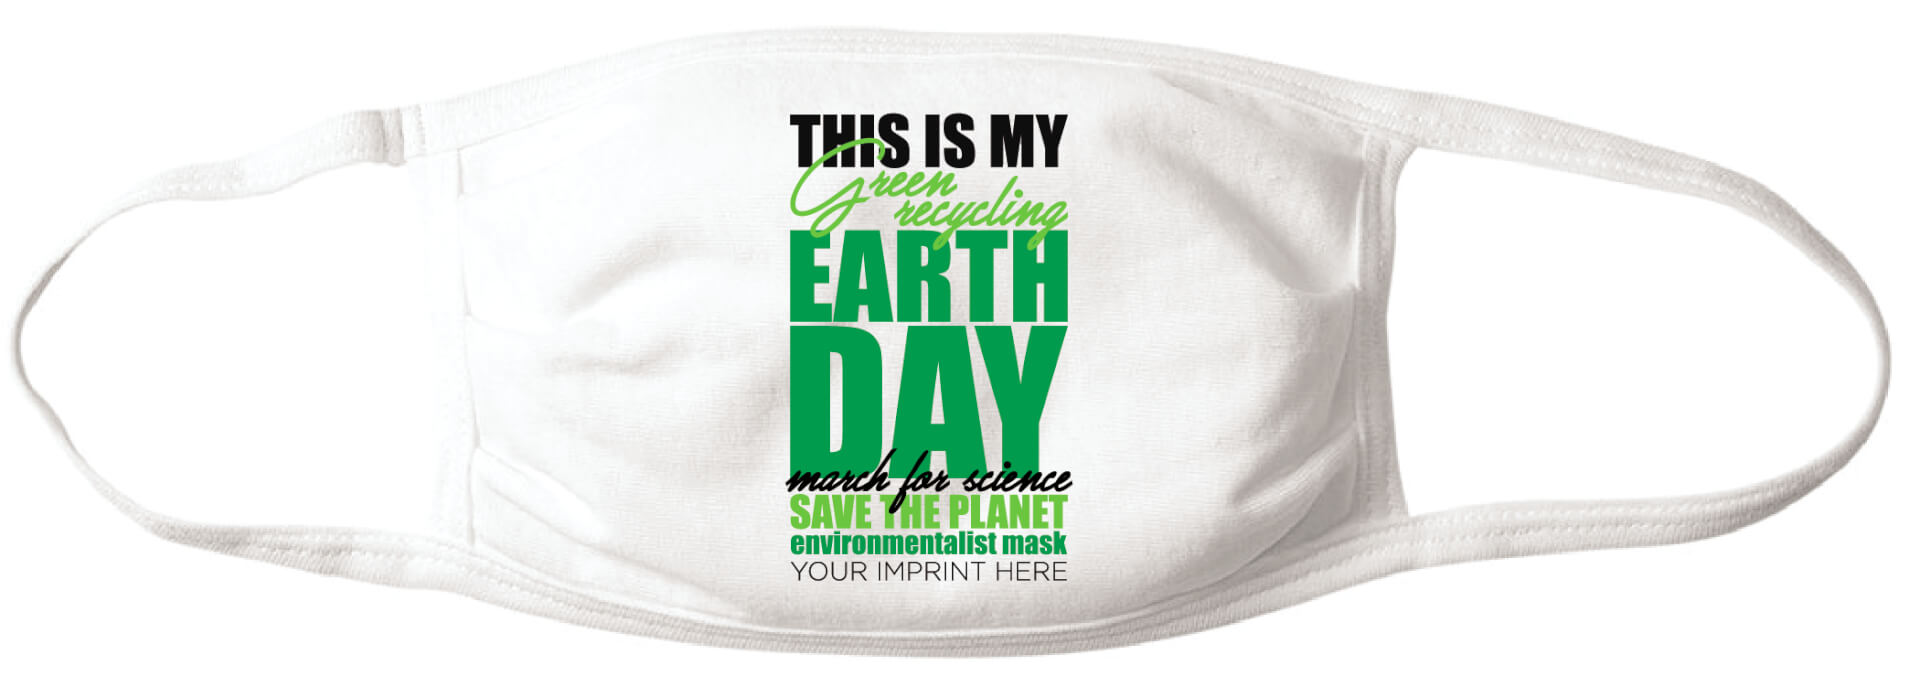 This Is My Earth Day Mask New Customizable Face Mask 2021